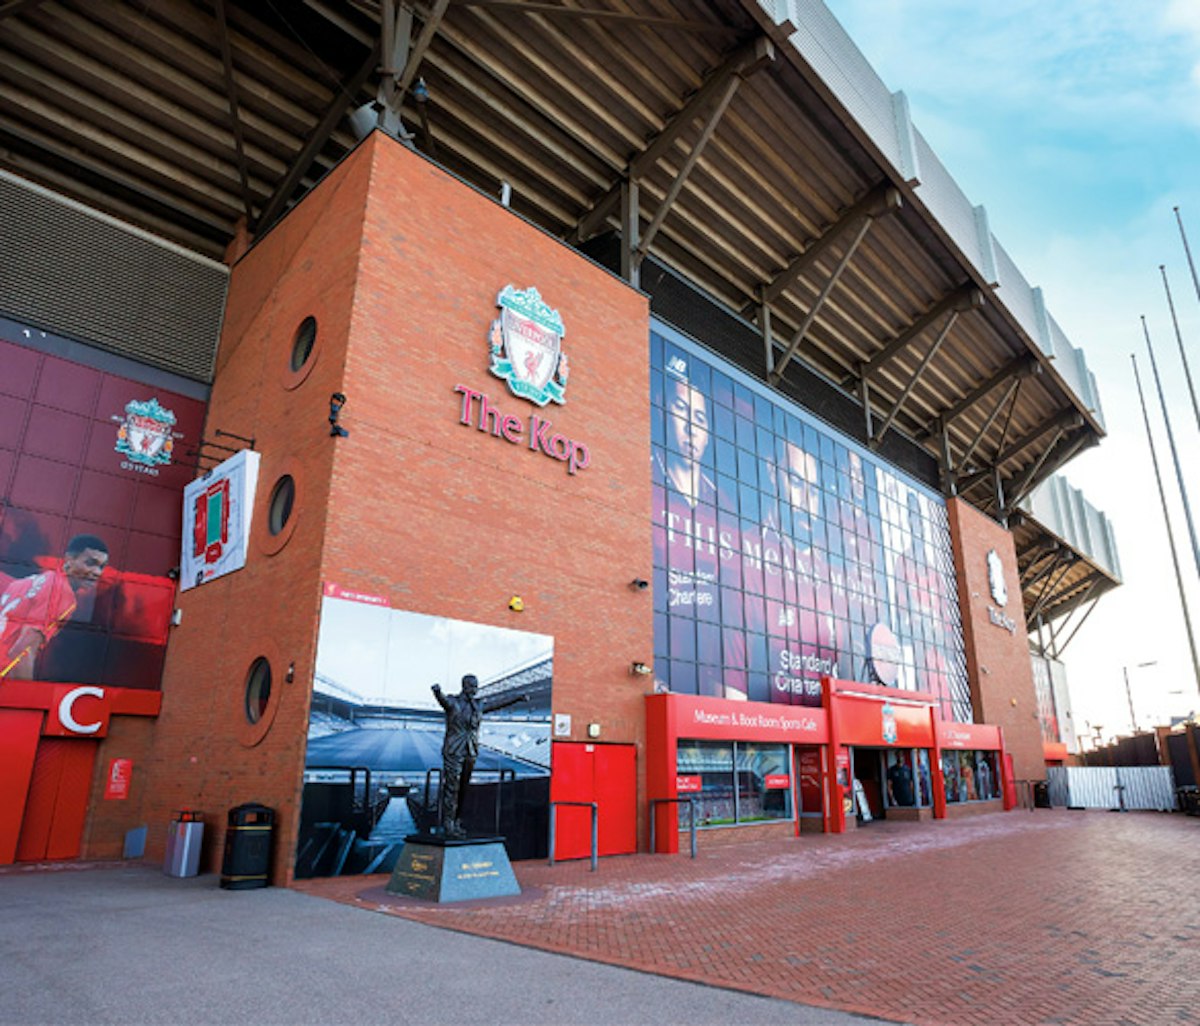 Exterior view of the kop entrance at anfield stadium with a statue and commemorative plaques.